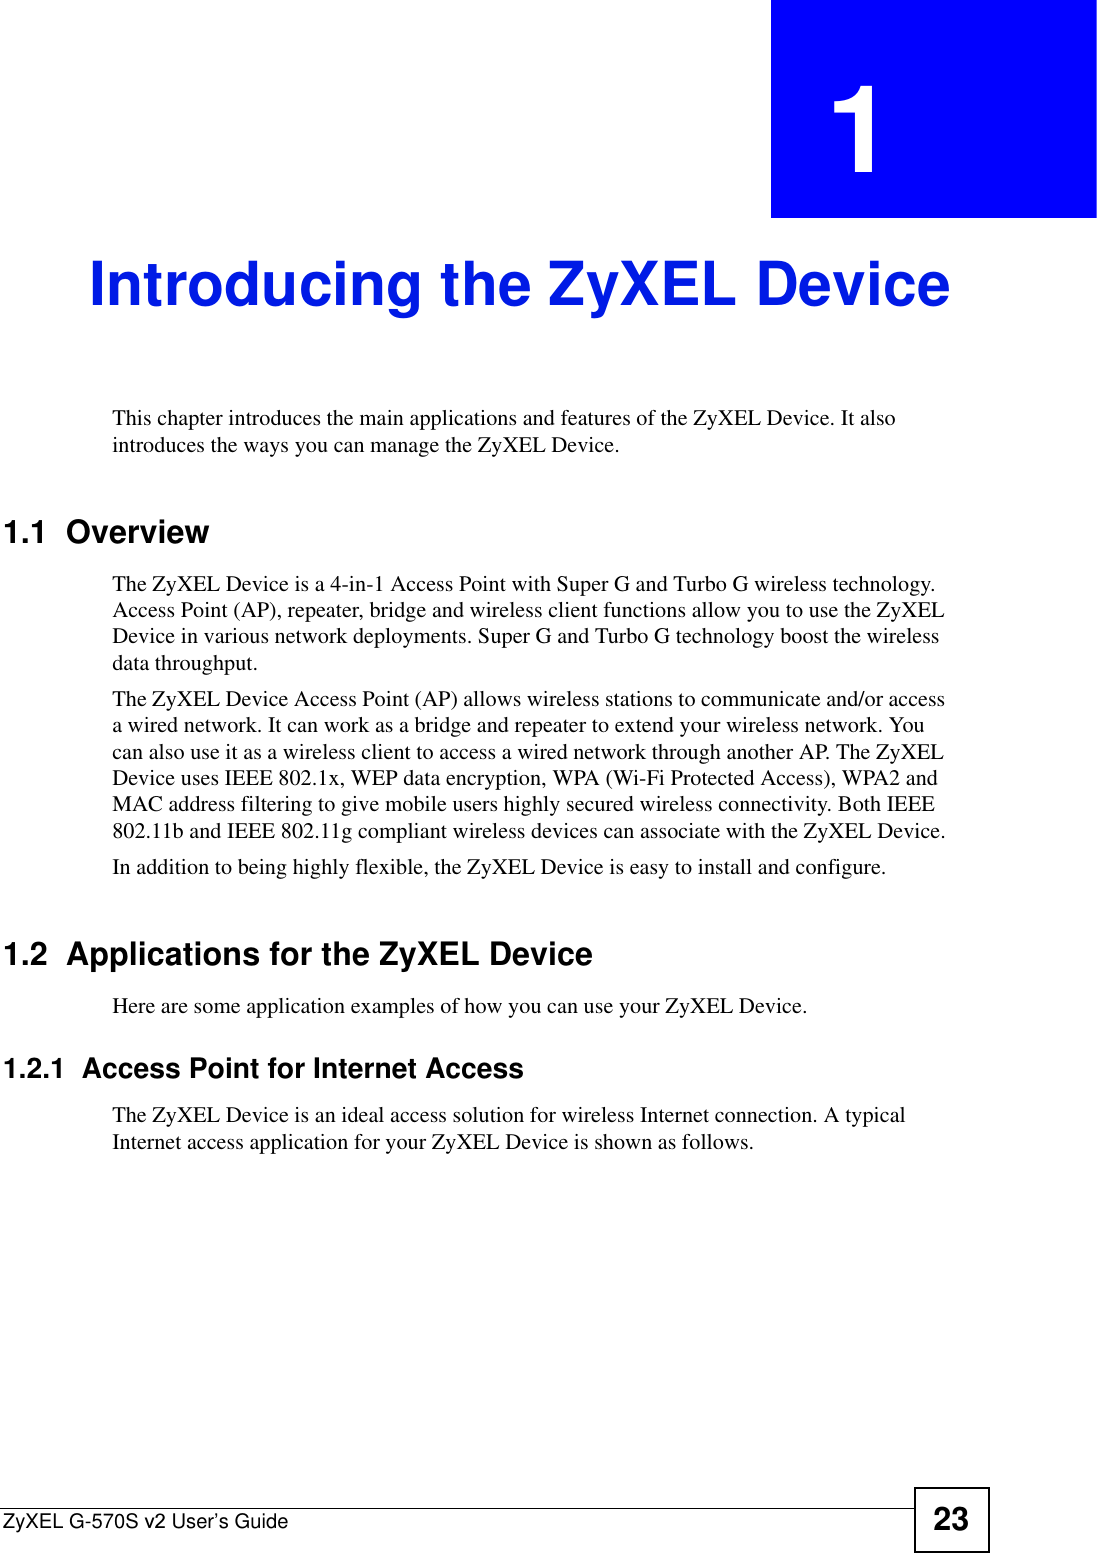 ZyXEL G-570S v2 User’s Guide 23CHAPTER  1 Introducing the ZyXEL DeviceThis chapter introduces the main applications and features of the ZyXEL Device. It also introduces the ways you can manage the ZyXEL Device.1.1  OverviewThe ZyXEL Device is a 4-in-1 Access Point with Super G and Turbo G wireless technology. Access Point (AP), repeater, bridge and wireless client functions allow you to use the ZyXEL Device in various network deployments. Super G and Turbo G technology boost the wireless data throughput.The ZyXEL Device Access Point (AP) allows wireless stations to communicate and/or access a wired network. It can work as a bridge and repeater to extend your wireless network. You can also use it as a wireless client to access a wired network through another AP. The ZyXEL Device uses IEEE 802.1x, WEP data encryption, WPA (Wi-Fi Protected Access), WPA2 and MAC address filtering to give mobile users highly secured wireless connectivity. Both IEEE 802.11b and IEEE 802.11g compliant wireless devices can associate with the ZyXEL Device.In addition to being highly flexible, the ZyXEL Device is easy to install and configure.1.2  Applications for the ZyXEL DeviceHere are some application examples of how you can use your ZyXEL Device. 1.2.1  Access Point for Internet AccessThe ZyXEL Device is an ideal access solution for wireless Internet connection. A typical Internet access application for your ZyXEL Device is shown as follows.